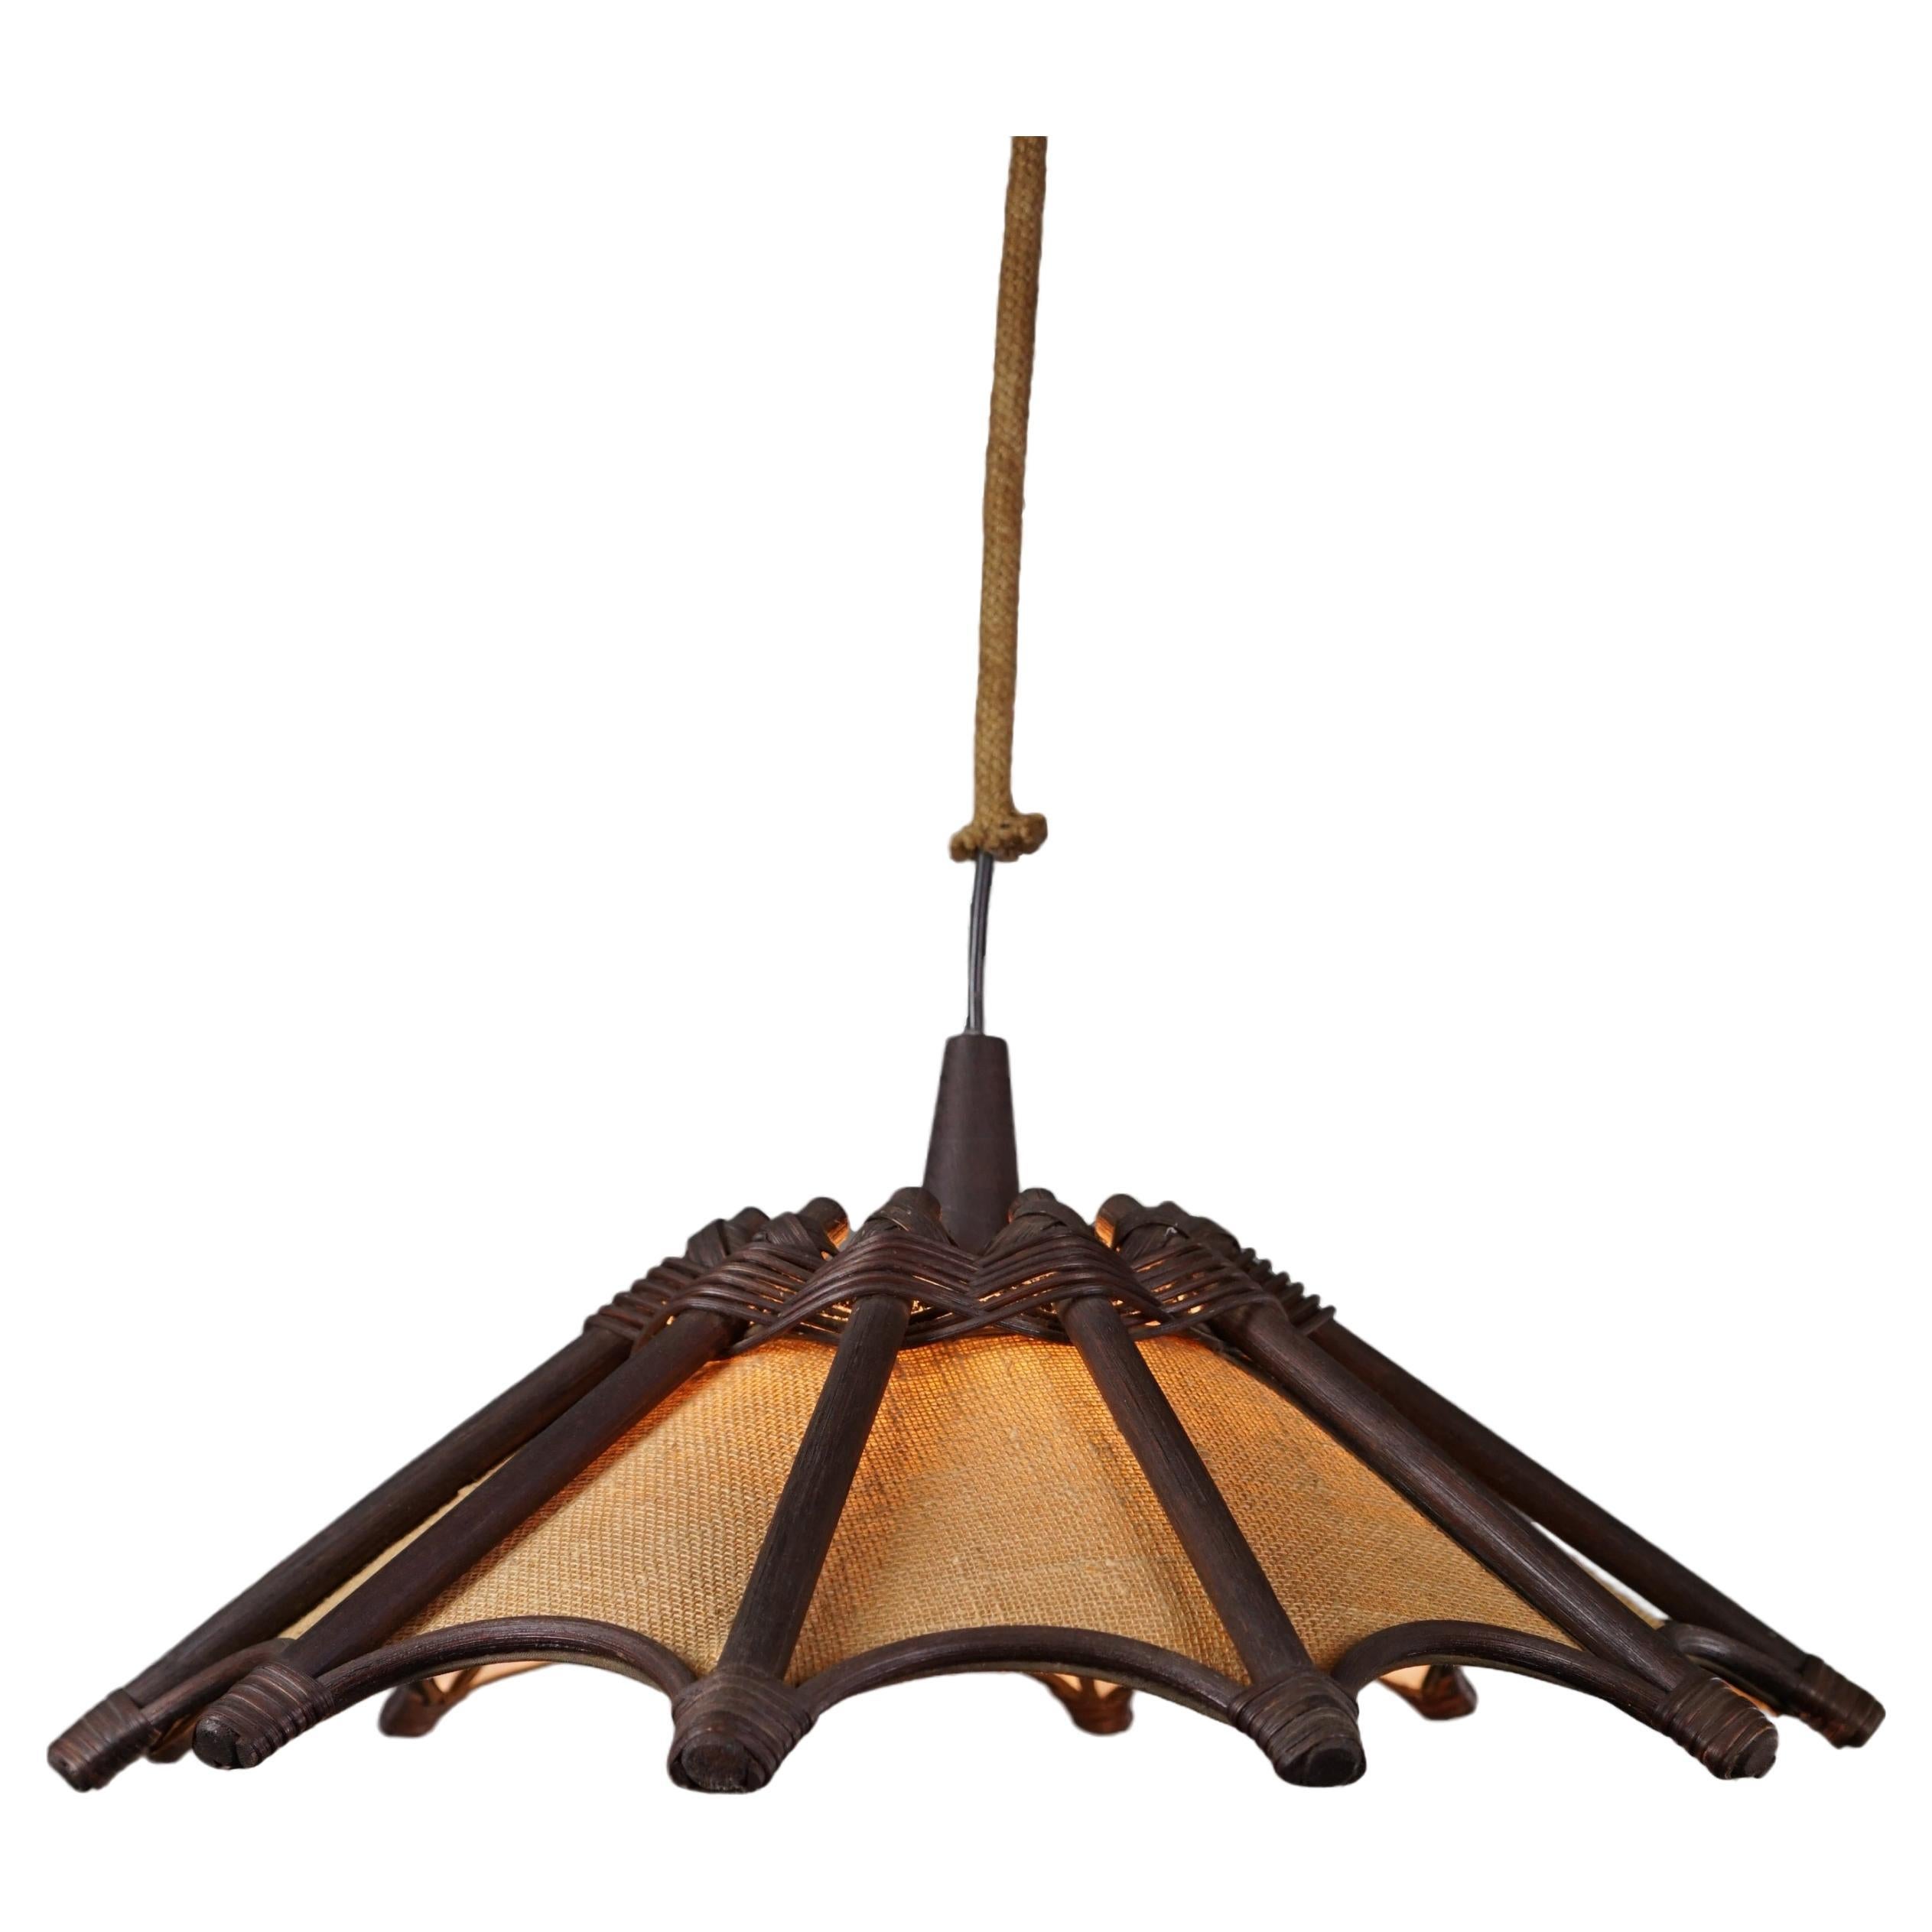 Atmospheric rattan Manou pendant lamp with wood and jute. For Sale